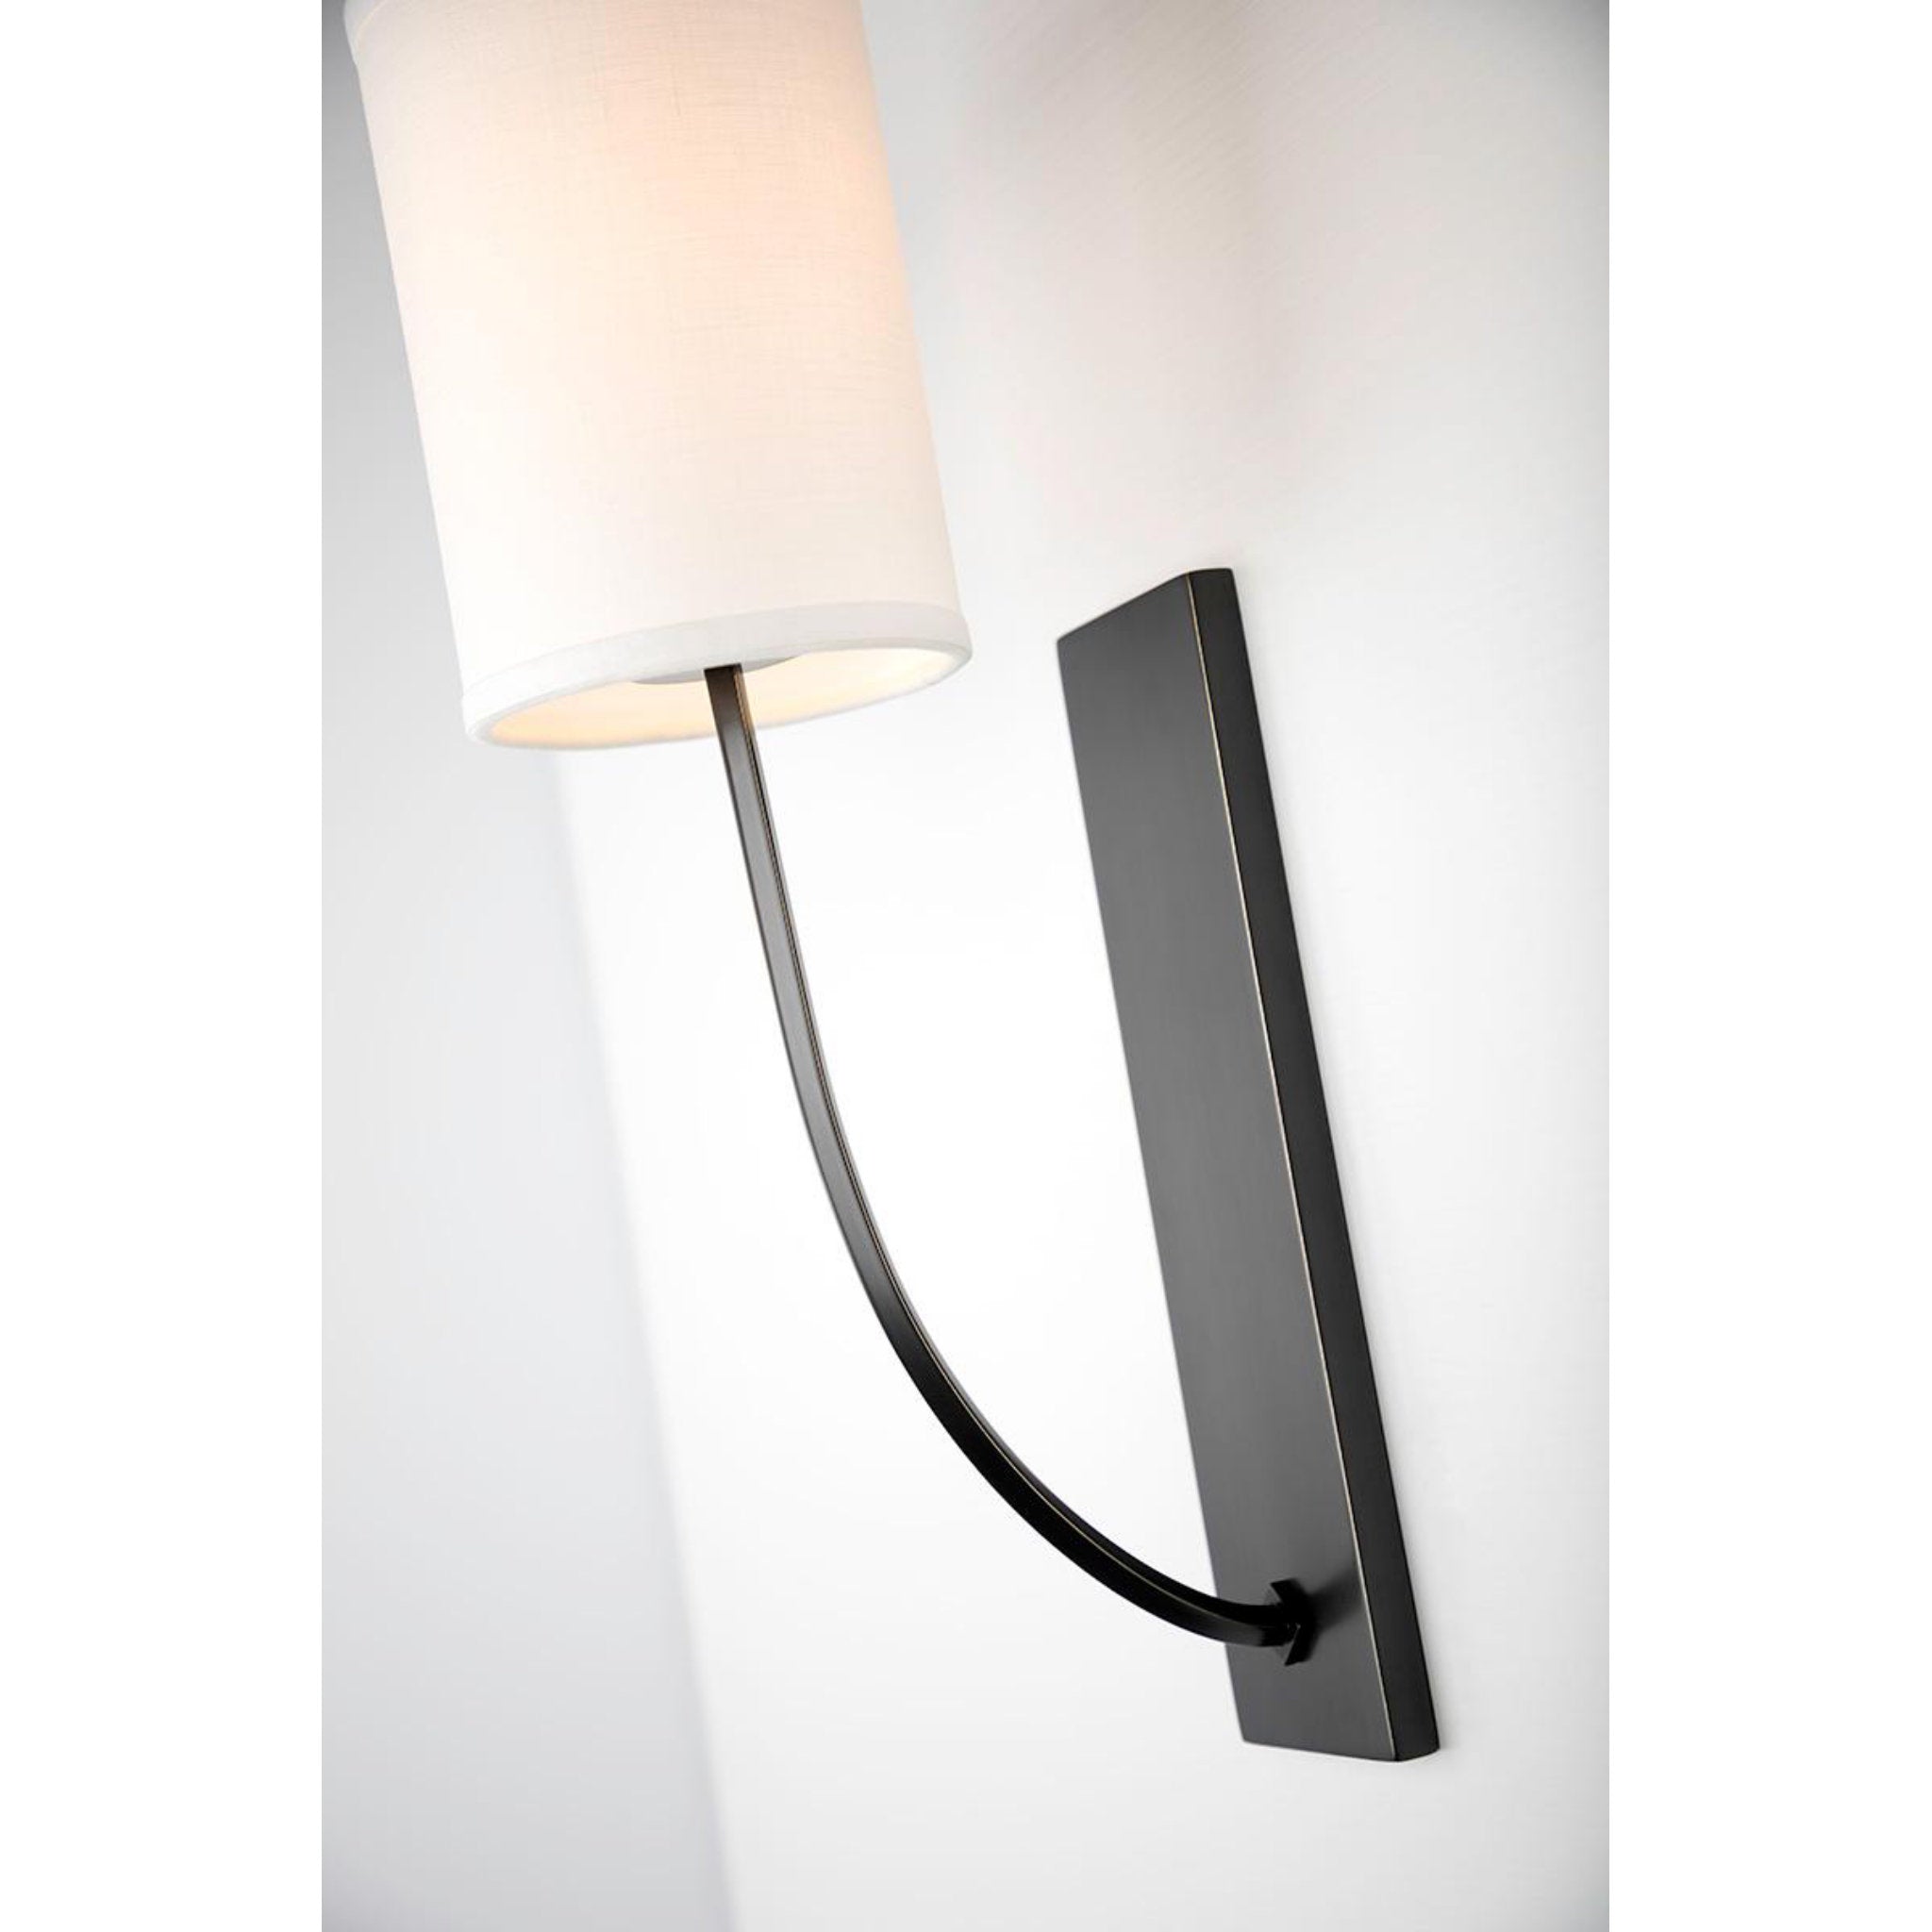 Colton 1 Light Wall Sconce in Polished Nickel